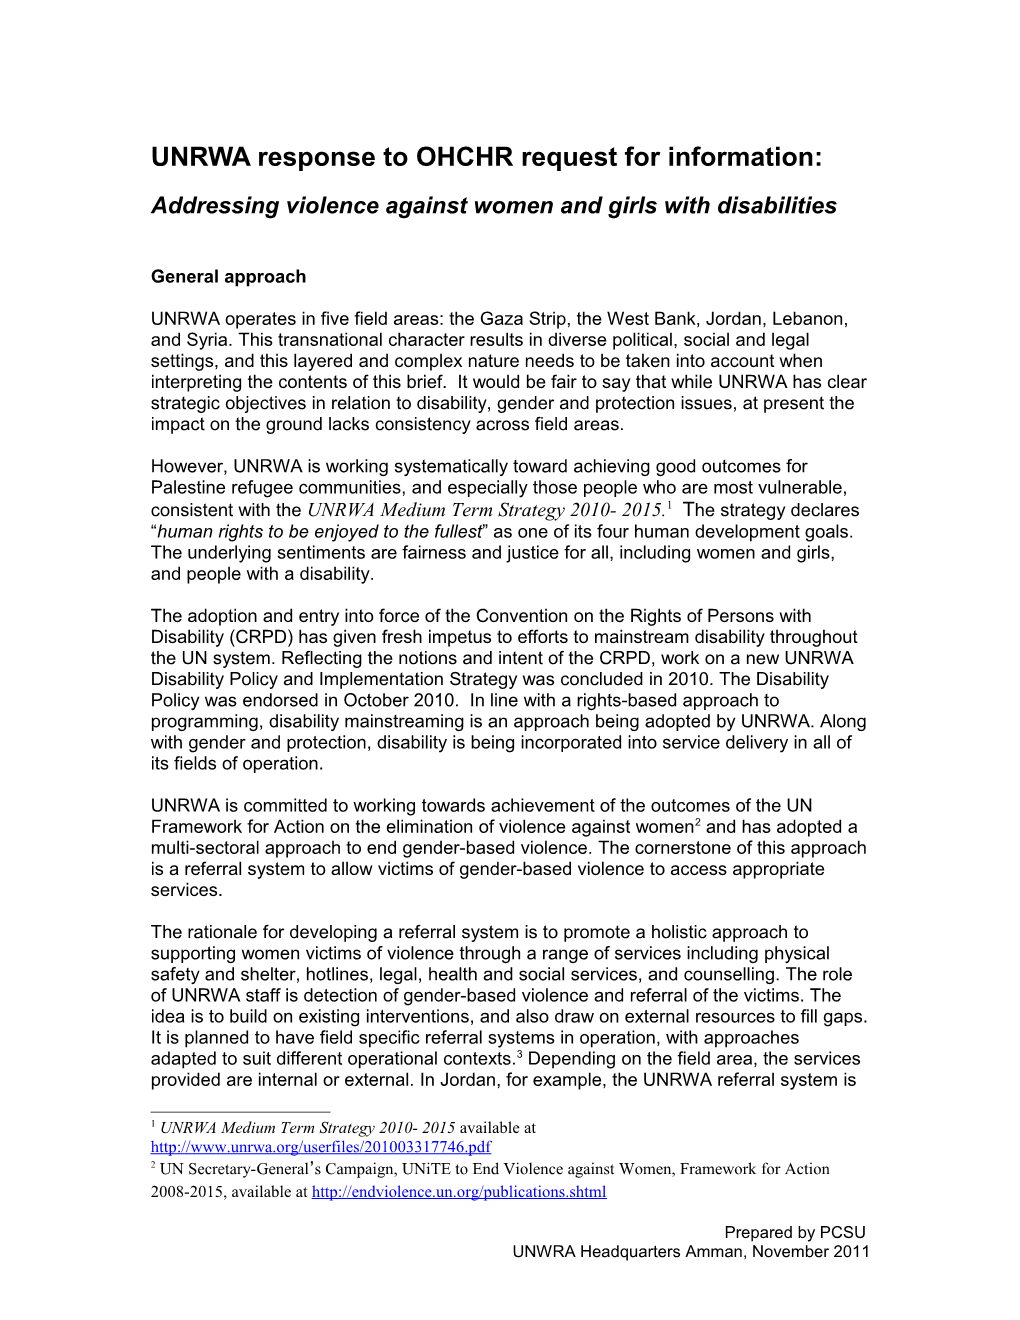 Draft Notes Response to Request for Information About Violence Against Women and Girls